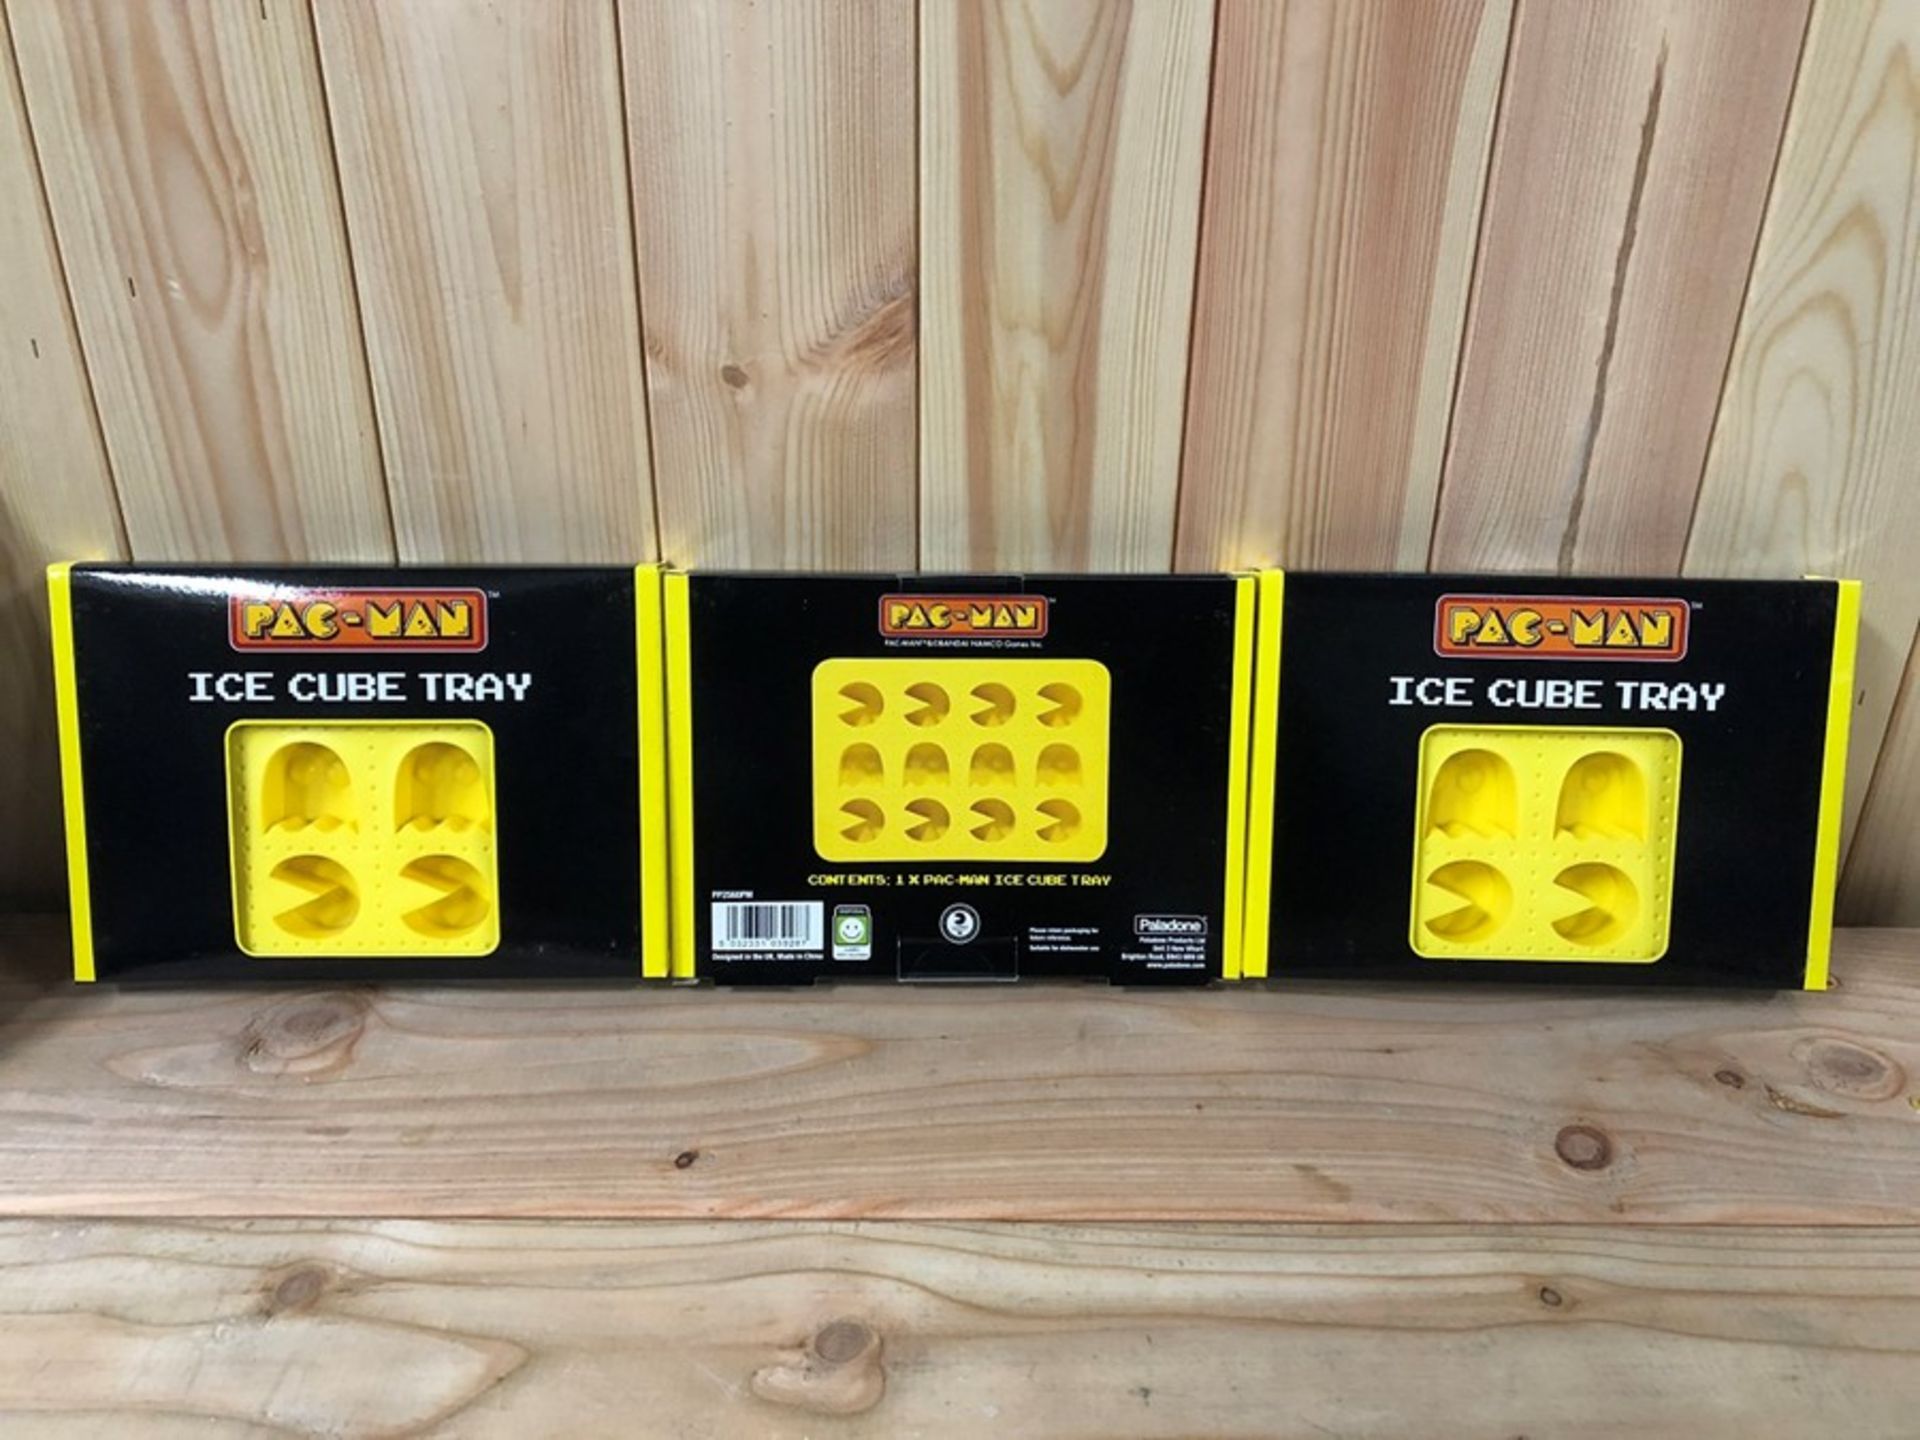 1 LOT TO CONTAIN 3 BOXED PAC-MAN ICE CUBE TRAYS (PUBLIC VIEWING AVAILABLE)